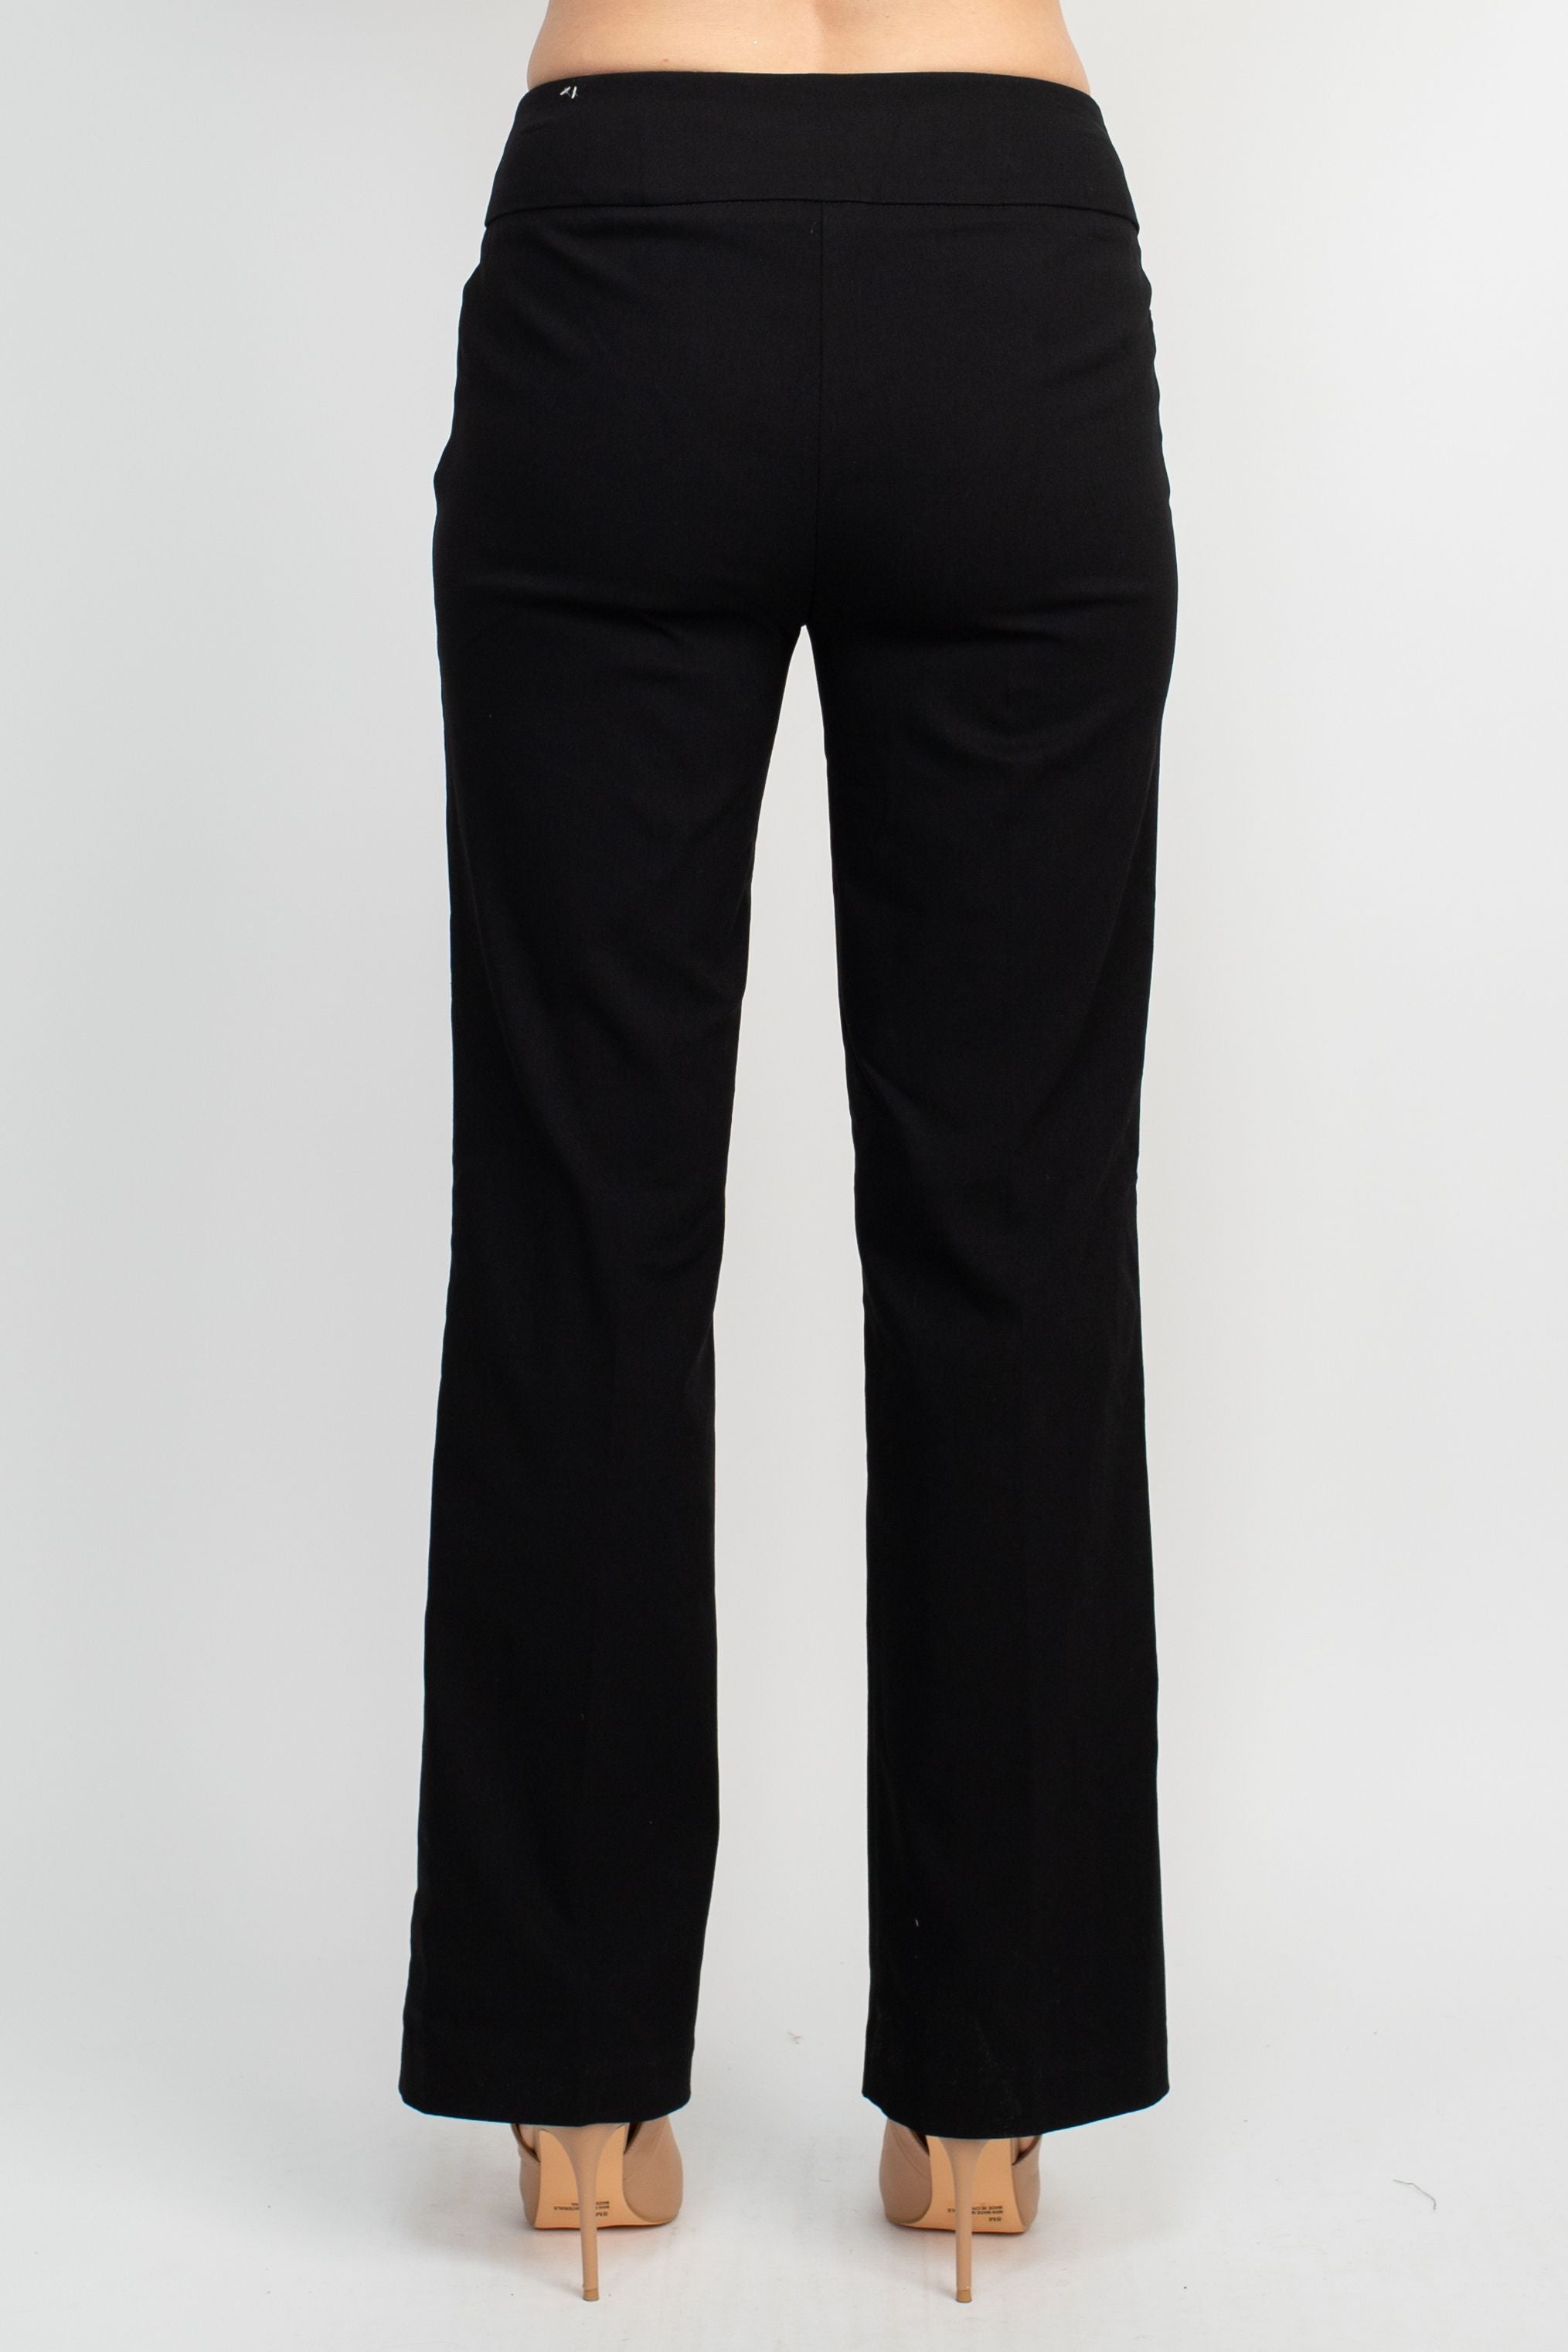 Counterparts Mid Waist Banded Waist Solid Straight Rayon Pant